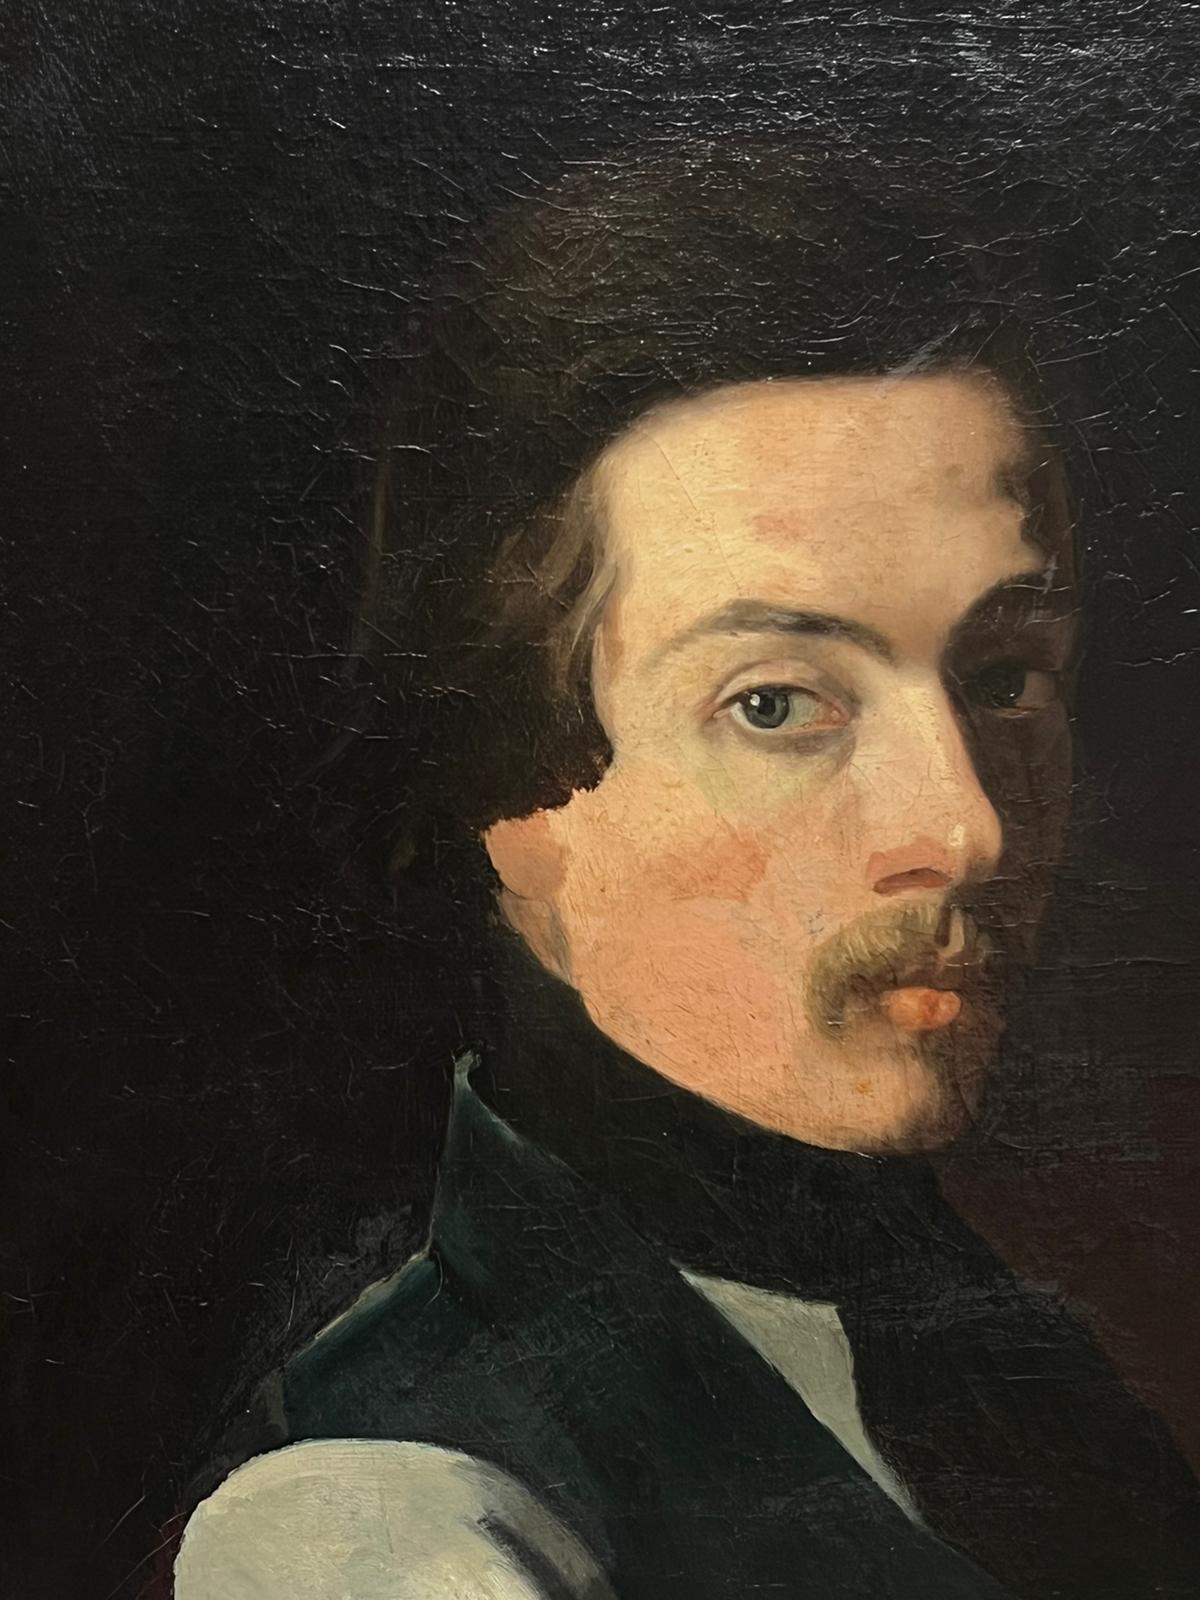 Portrait of a Man with Moustache
believed to be a self portrait of the artist
French School, circa 1870's
oil on canvas, framed
framed: 20.5 x 17 inches
canvas: 18 x 15 inches
provenance: private collection, France
condition: very good and sound